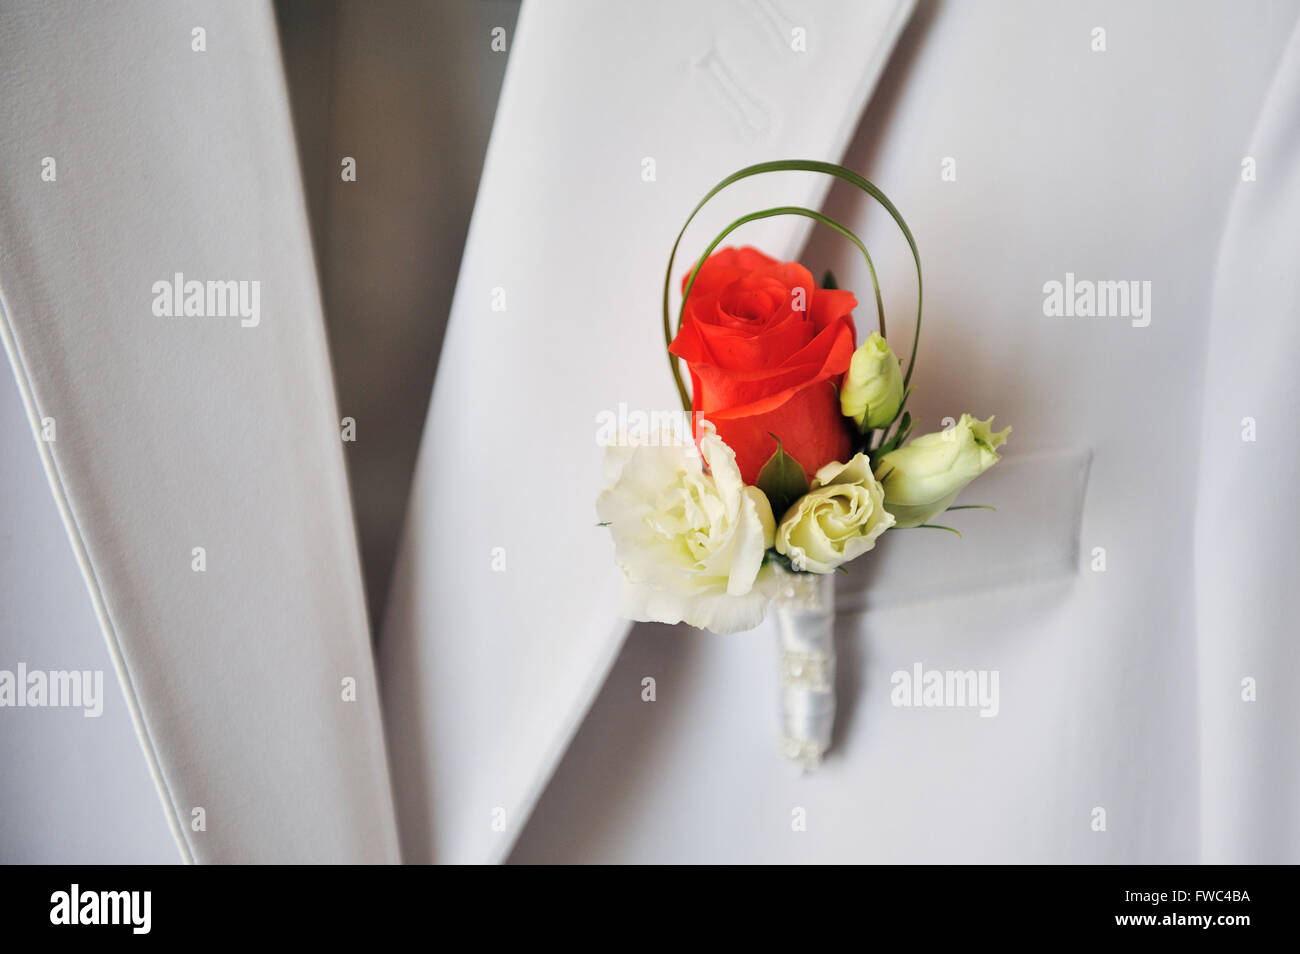 groom's red and white rose boutonniere Stock Photo